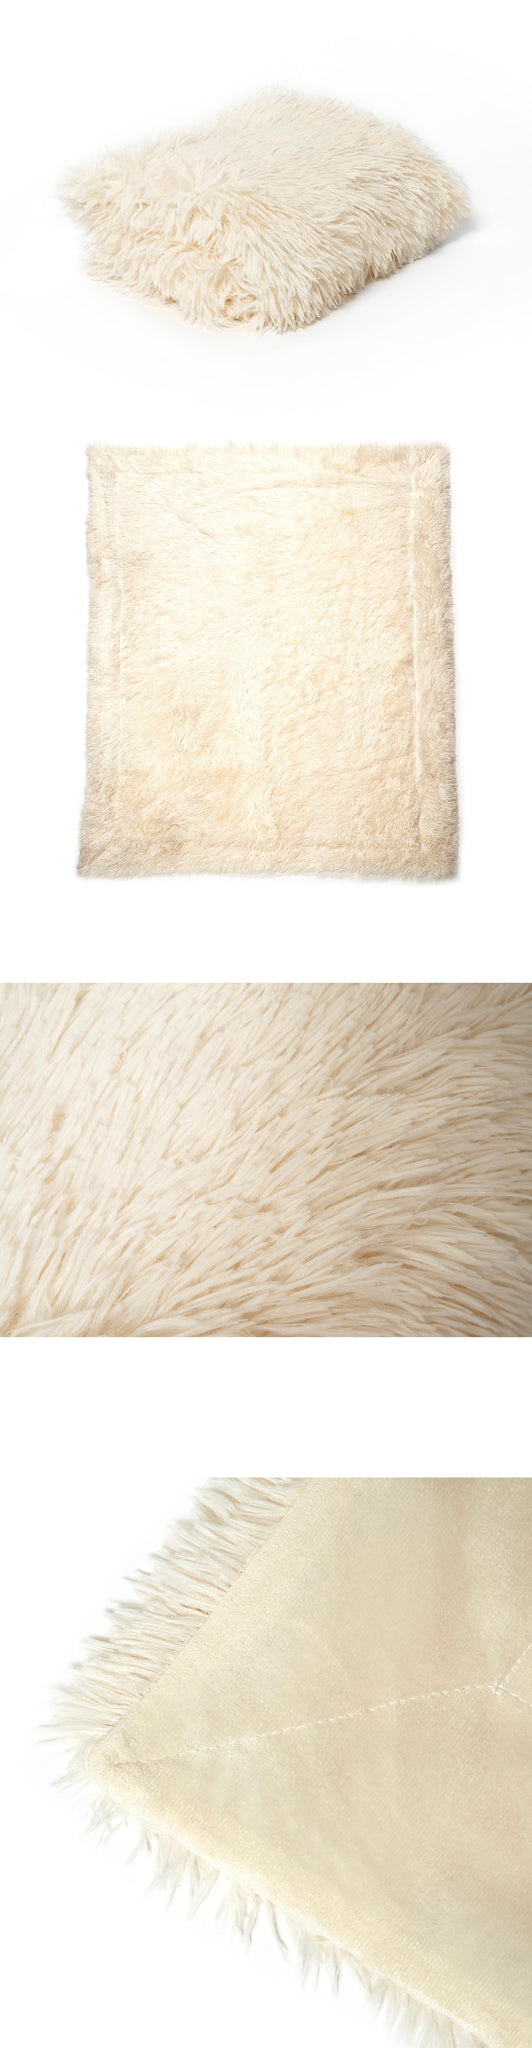 Isselle Vermont Faux Fur Throw - Creamy Ivory